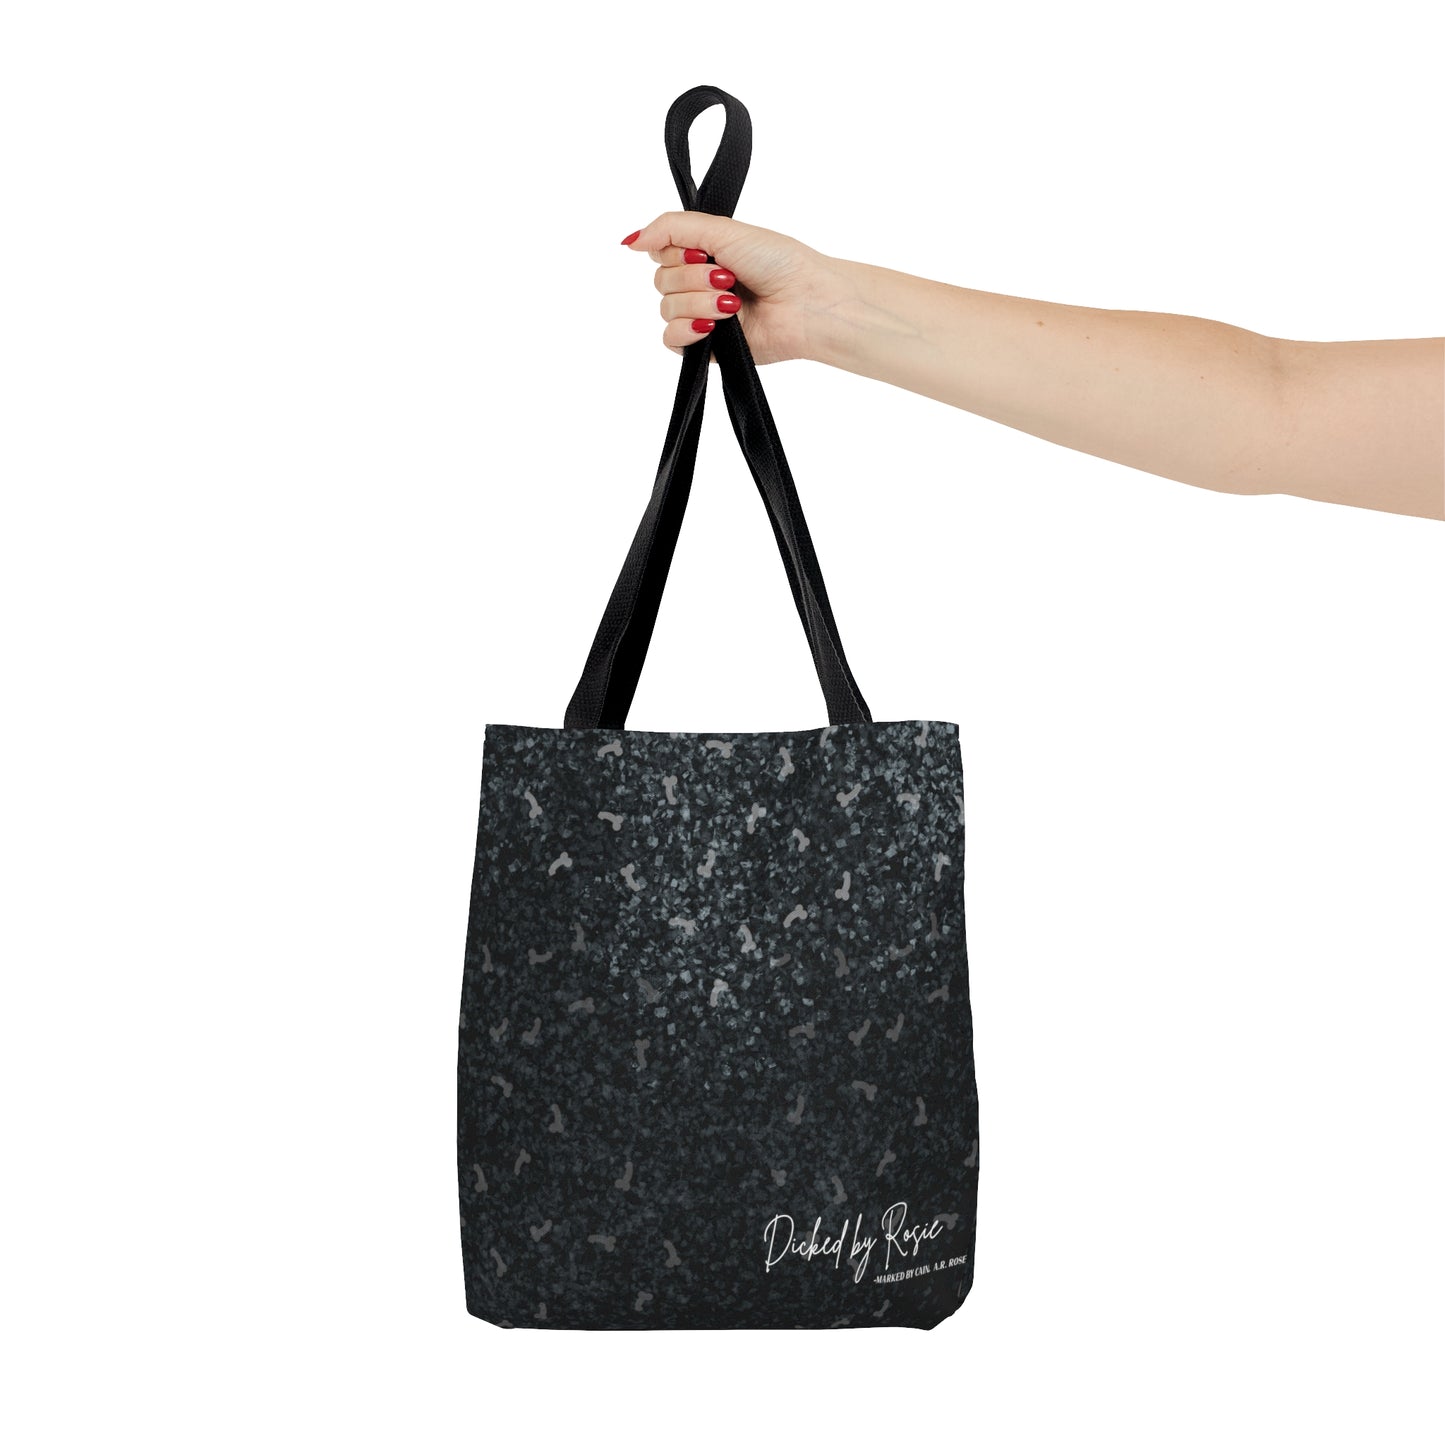 Marked by Cain Tote Bag